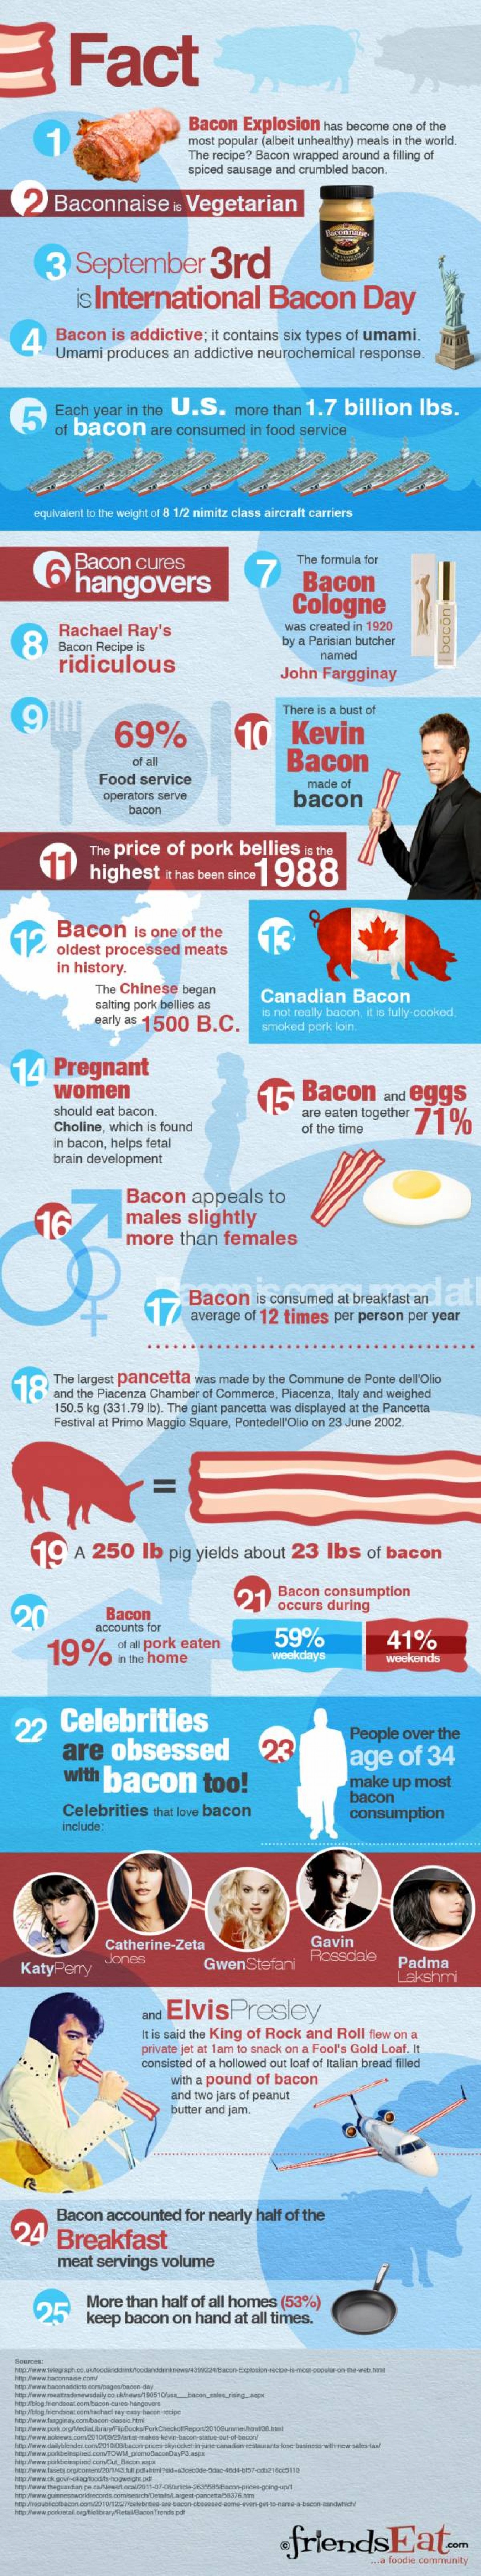 25-fun-facts-about-bacon_50290c7522be3_w1500